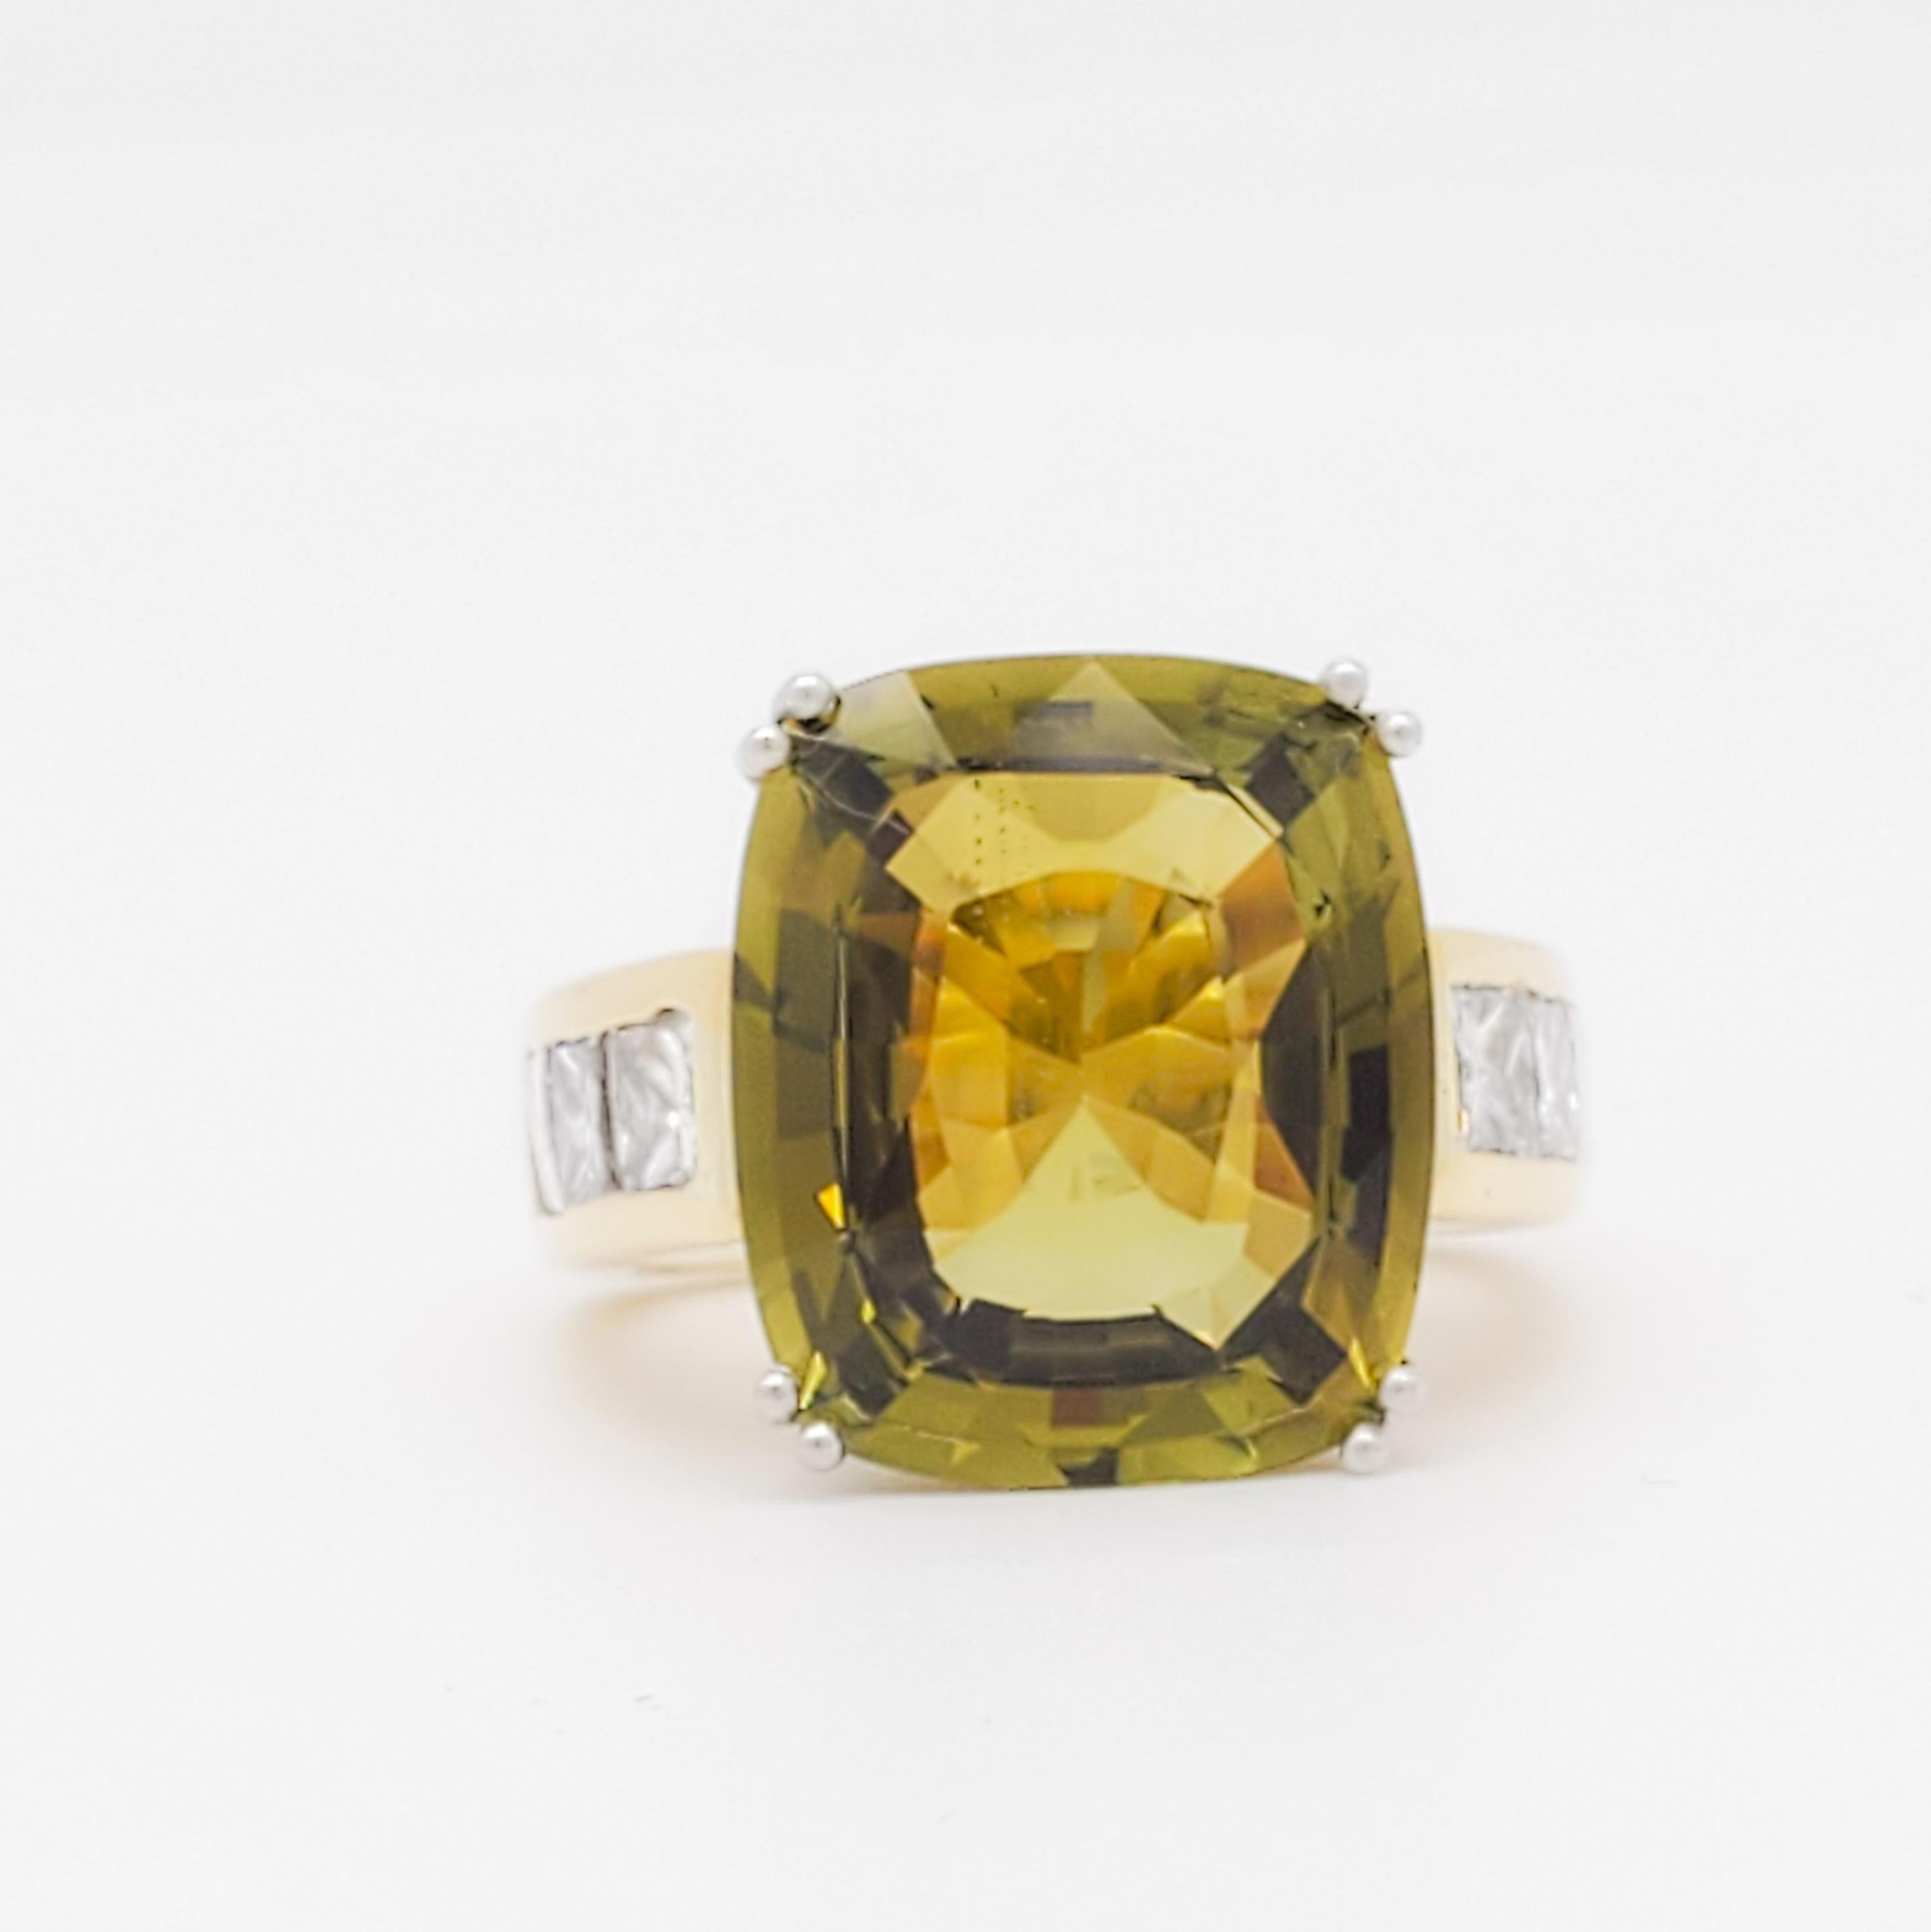 Gorgeous 10.80 ct. color change alexandrite cushion with 0.25 ct. good quality white diamond princess cuts.  Handmade in 18k yellow gold.  Ring size 4.5.